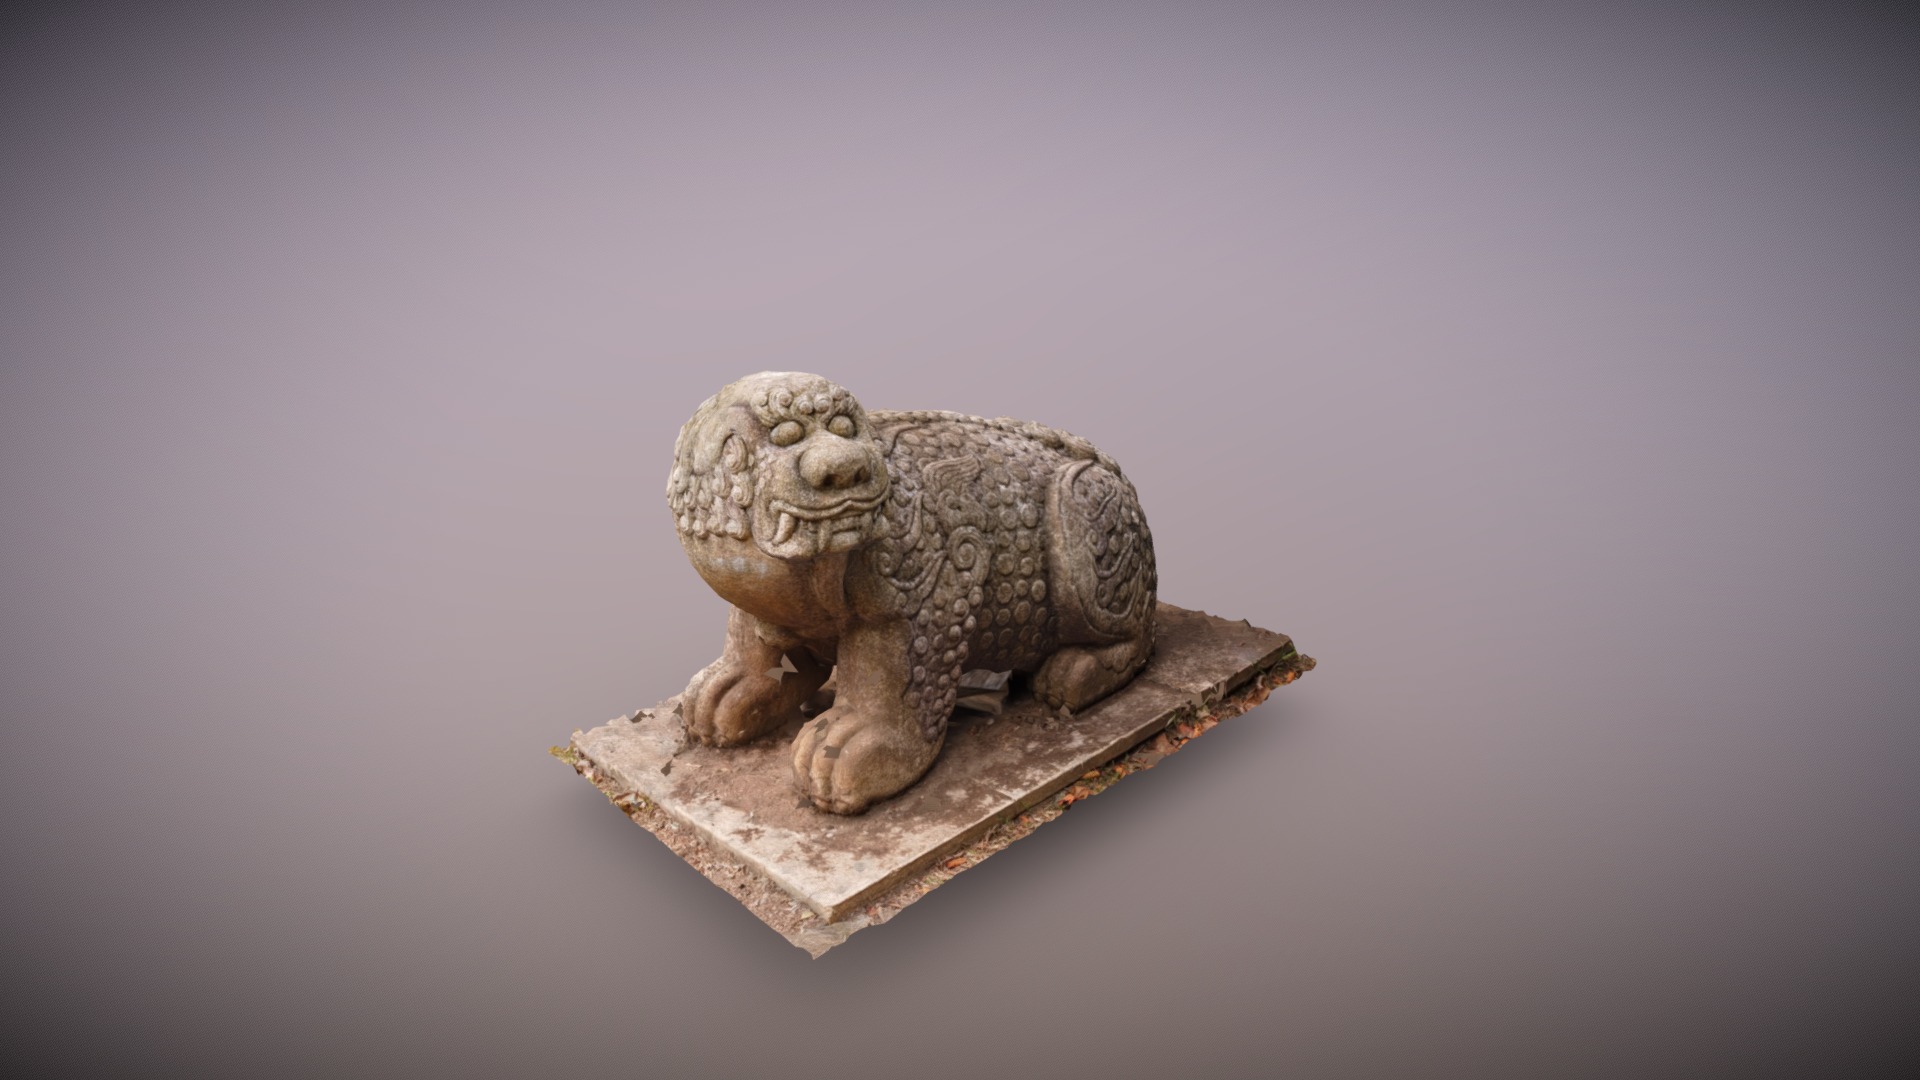 3D model Haitai Statue – Maui - This is a 3D model of the Haitai Statue - Maui. The 3D model is about a small statue of a turtle.